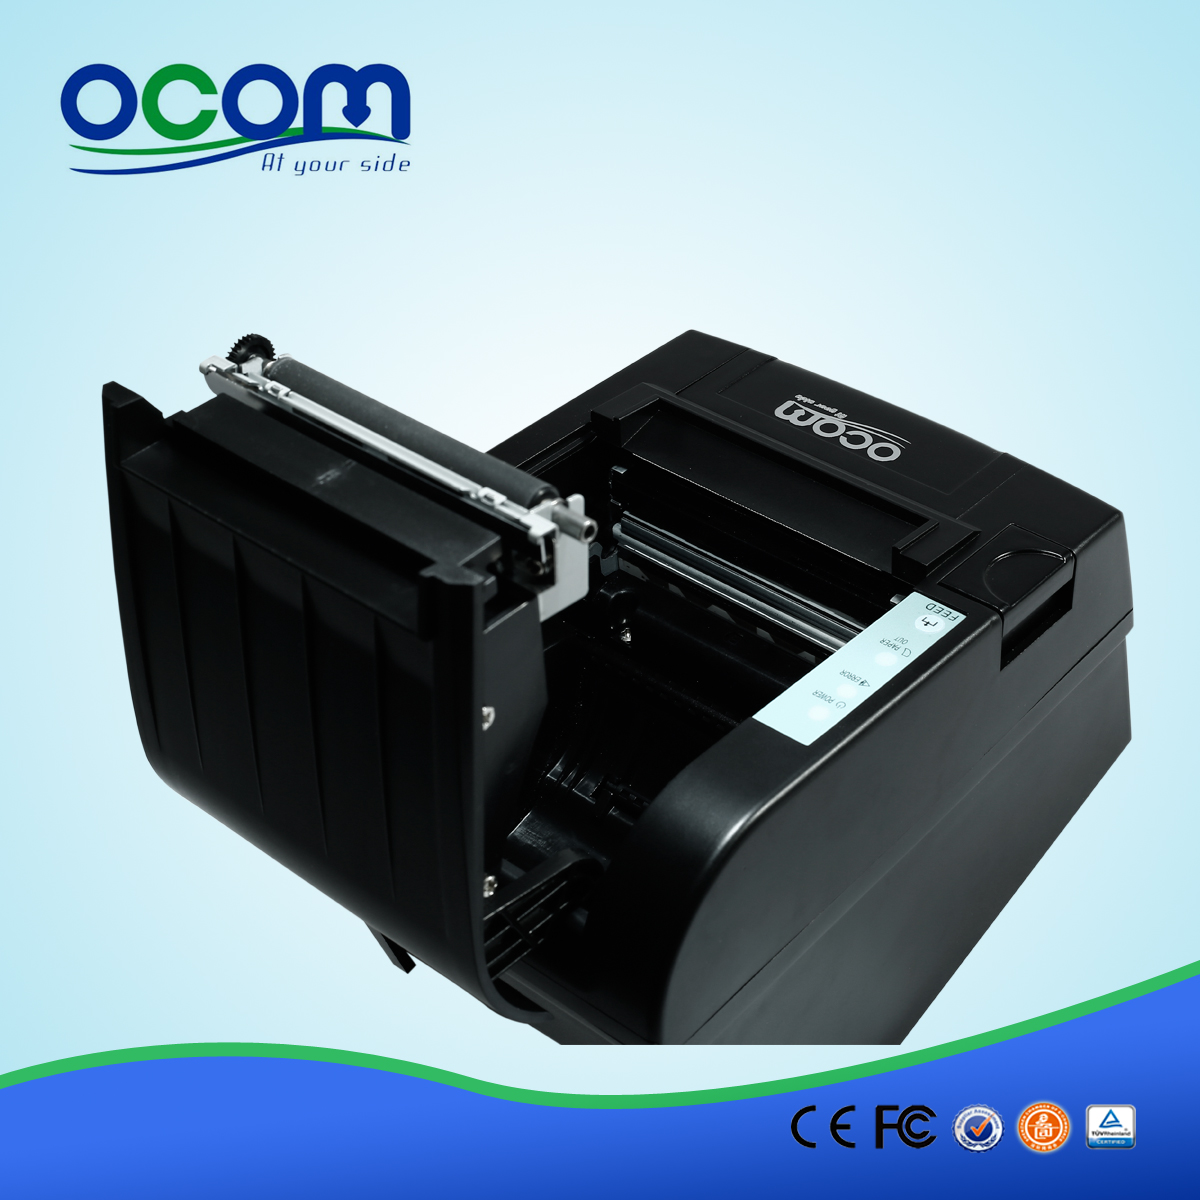 80mm WIFI Android Thermal Receipt Printer - OCPP-806-W